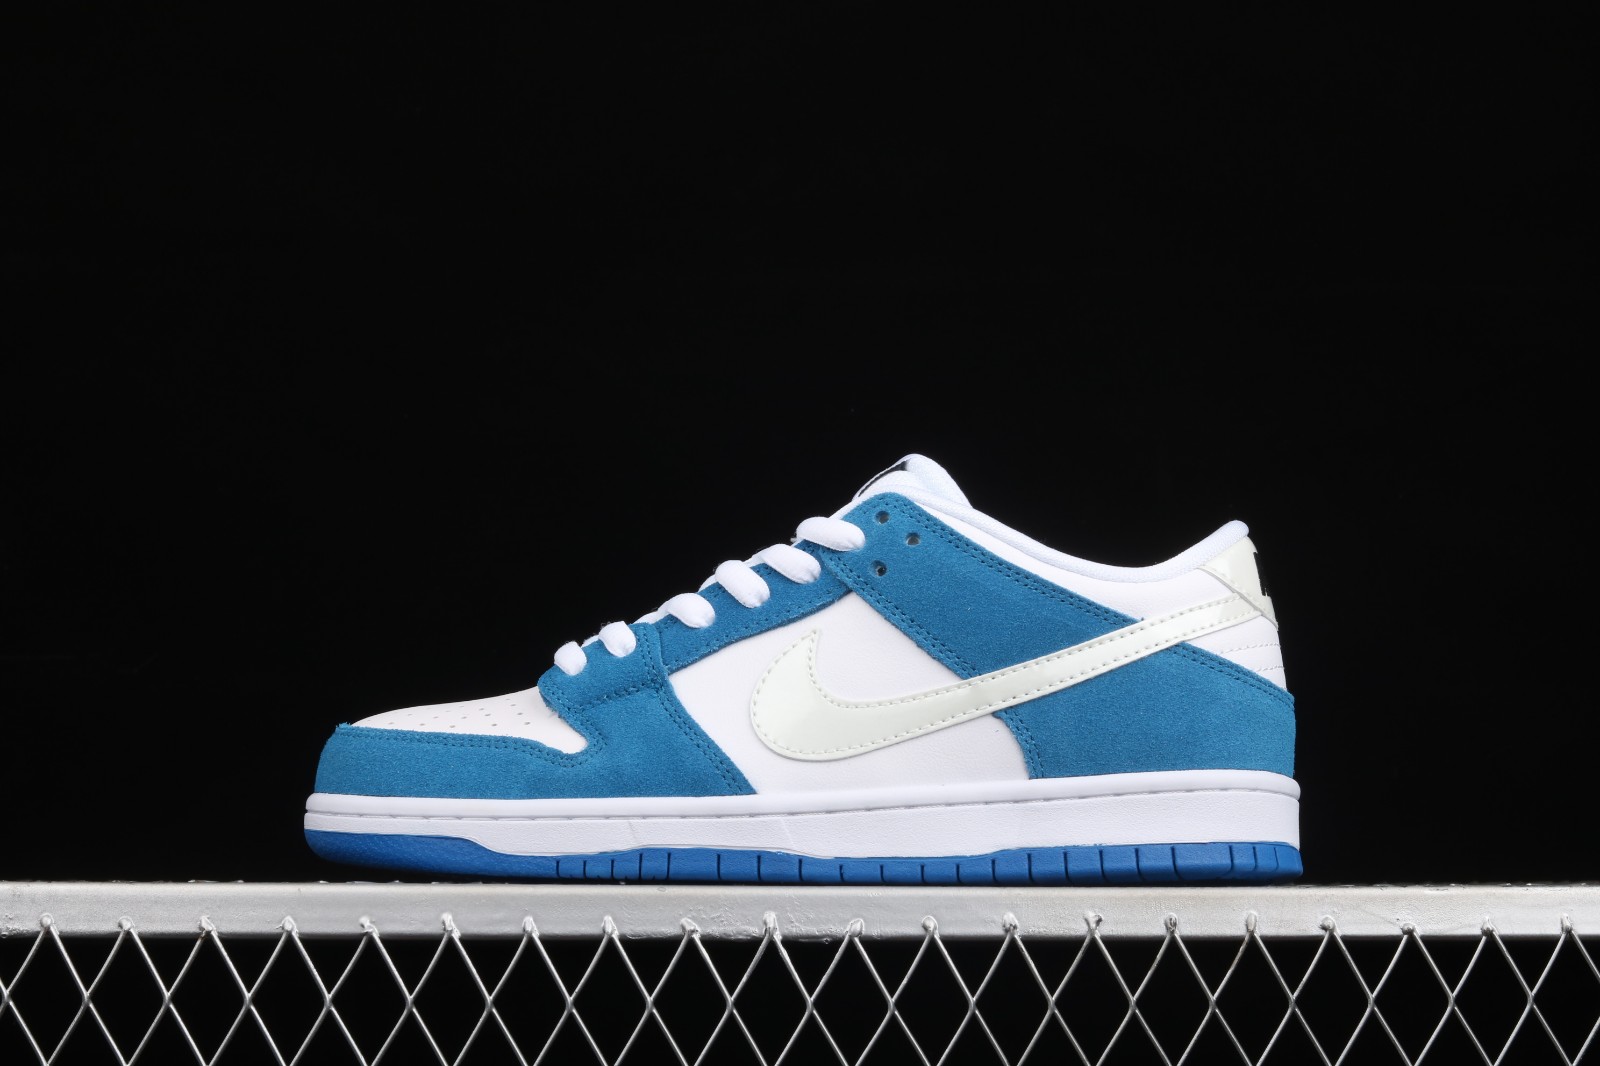 Reusachtig textuur Somatische cel MultiscaleconsultingShops - Nike Dunk Summit Low Pro SB Ishod Wair Blue  Apark White Black 819674 - 410 - The Nike Space Hippie 01 Makes A Comeback  In White And Blue